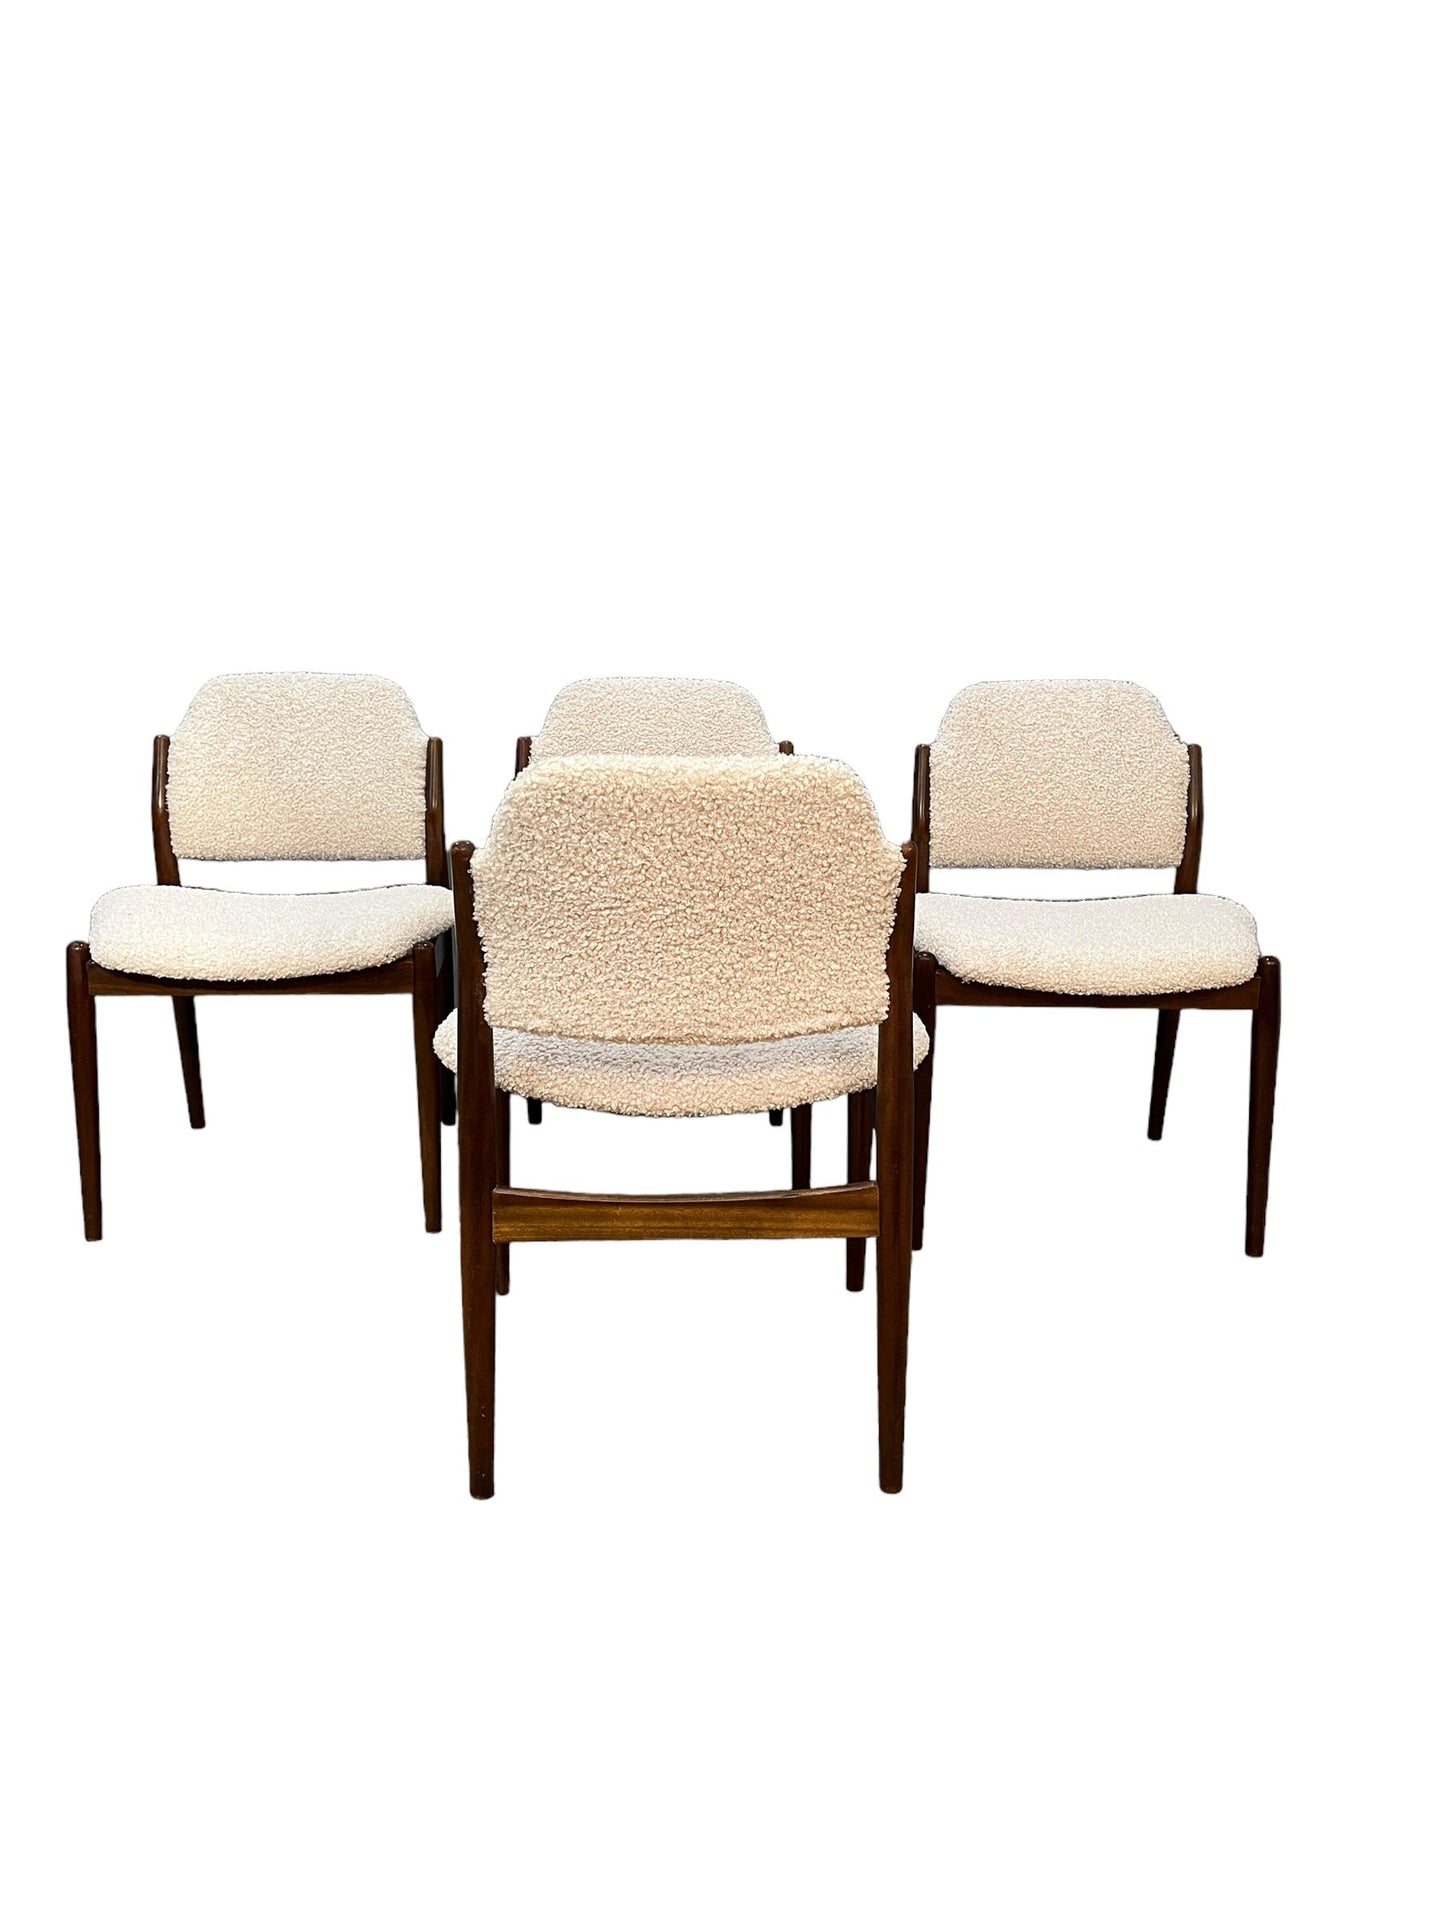 Mid Century danish rosewood dining chairs set of 4